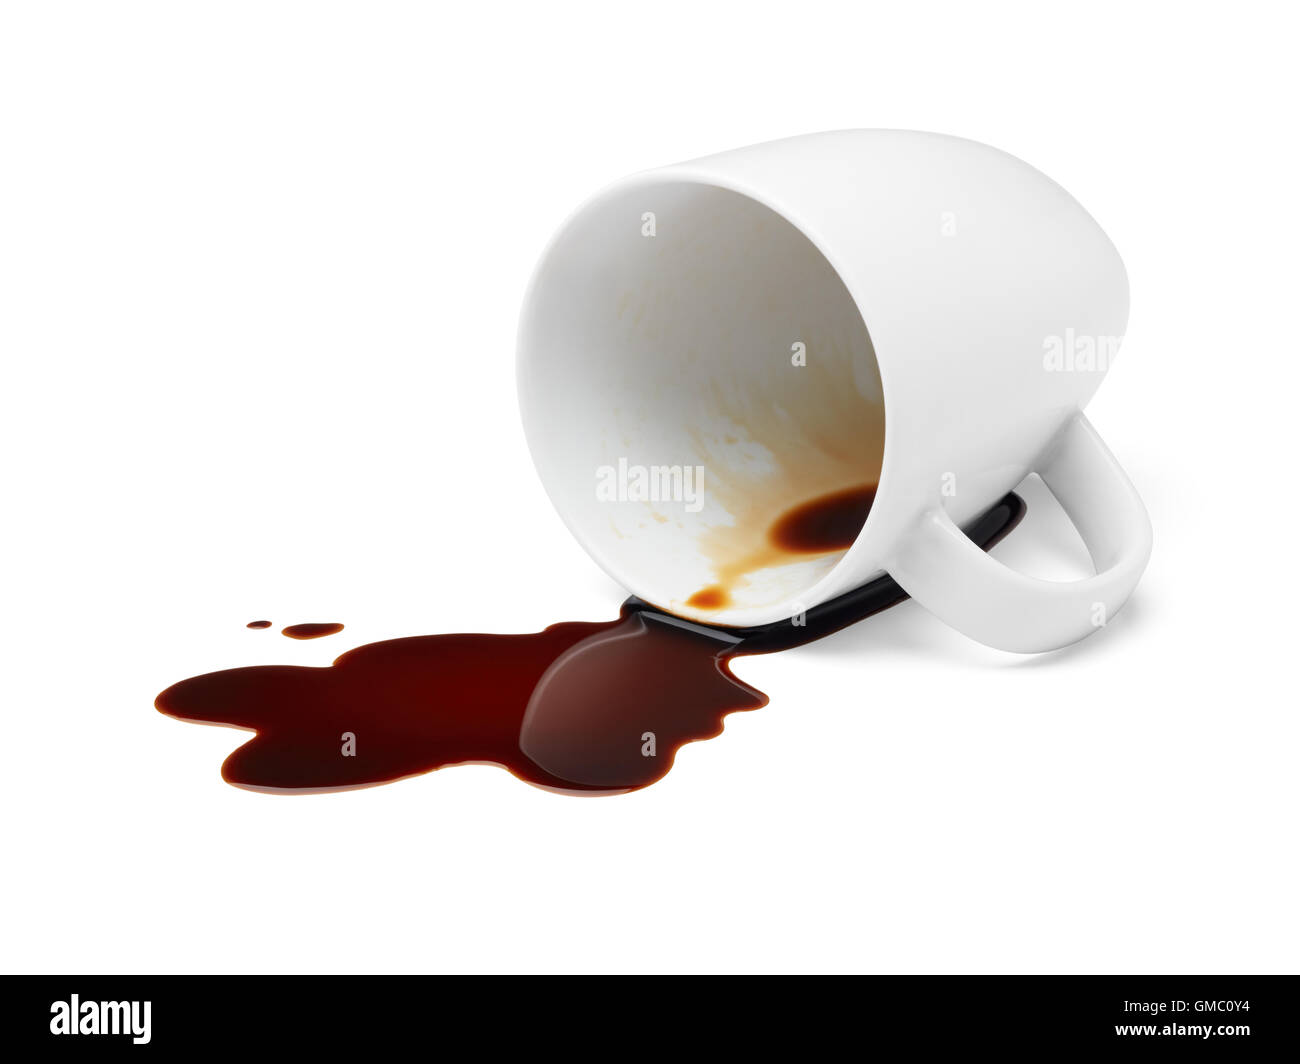 cup of black coffee spilling causing stained Stock Photo